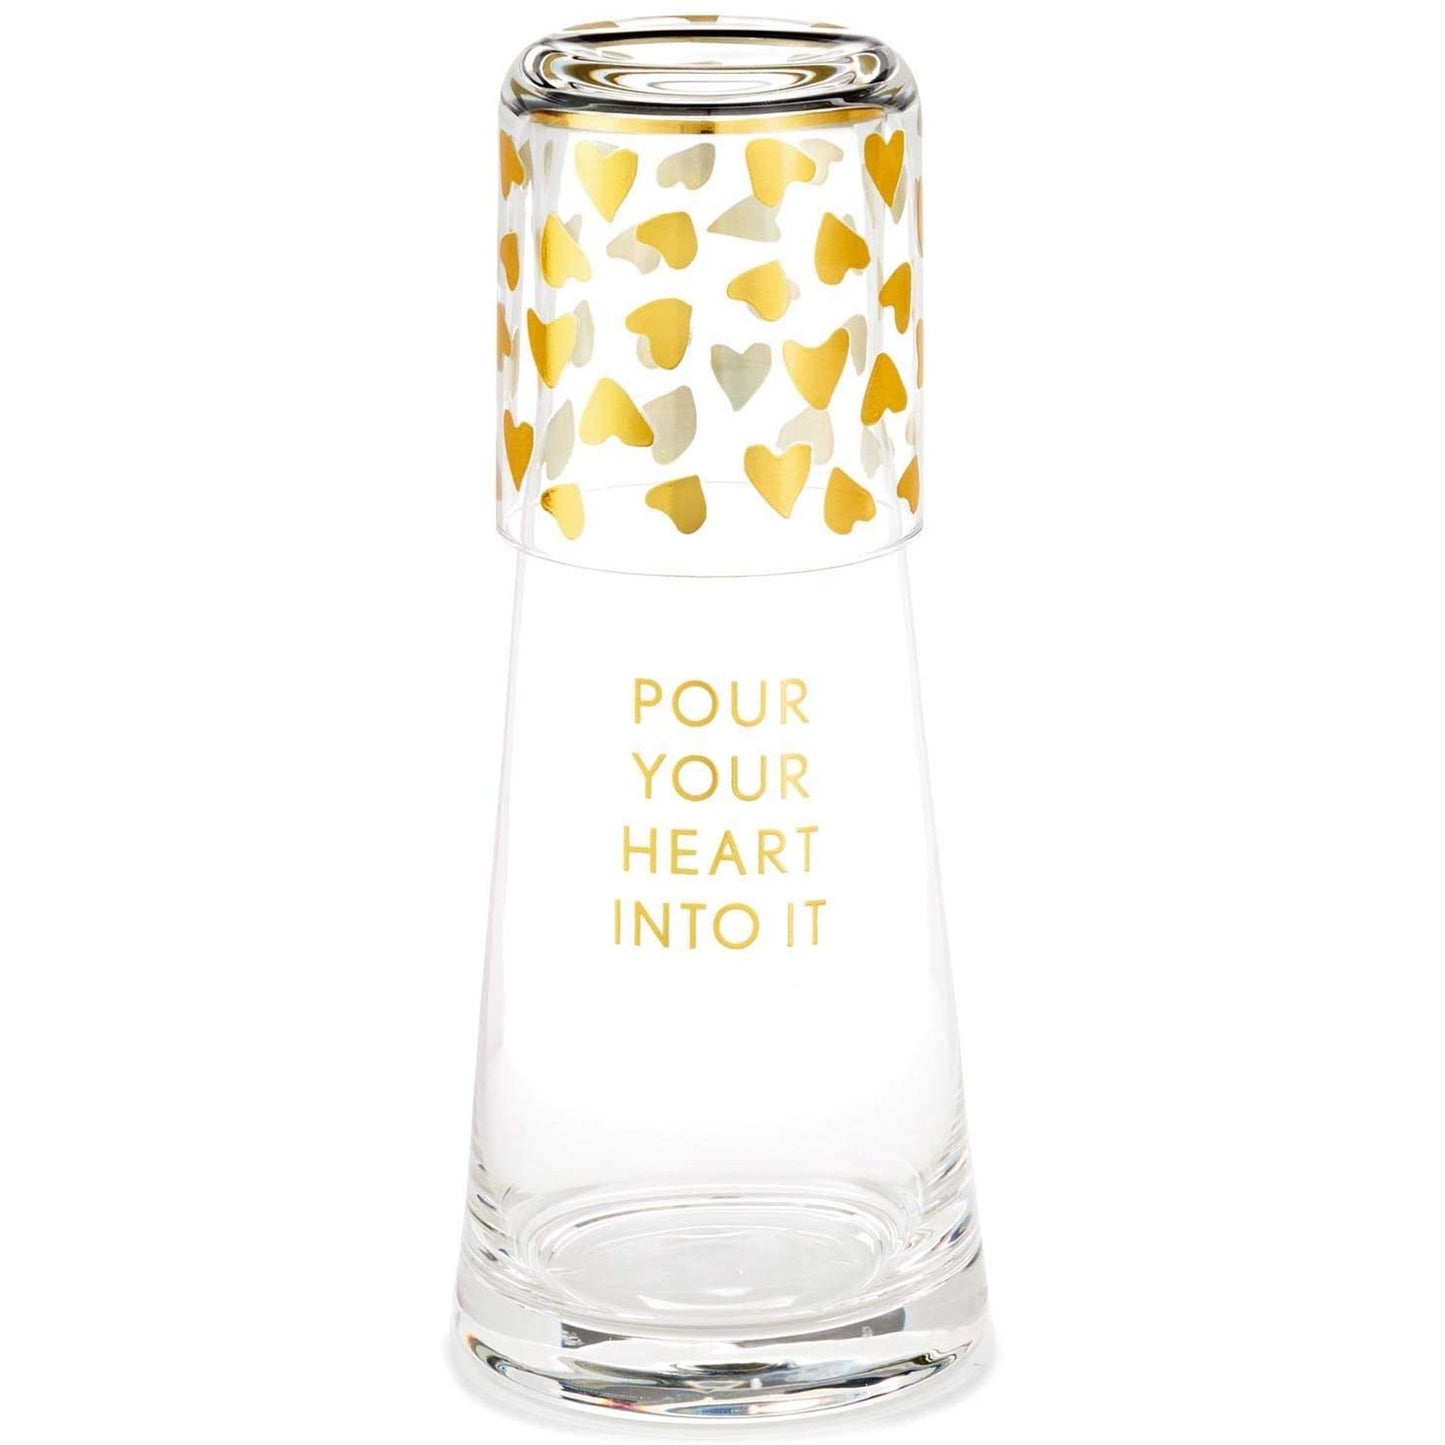 Pour Your Heart Into it - Carpe and Drinking Glass Set